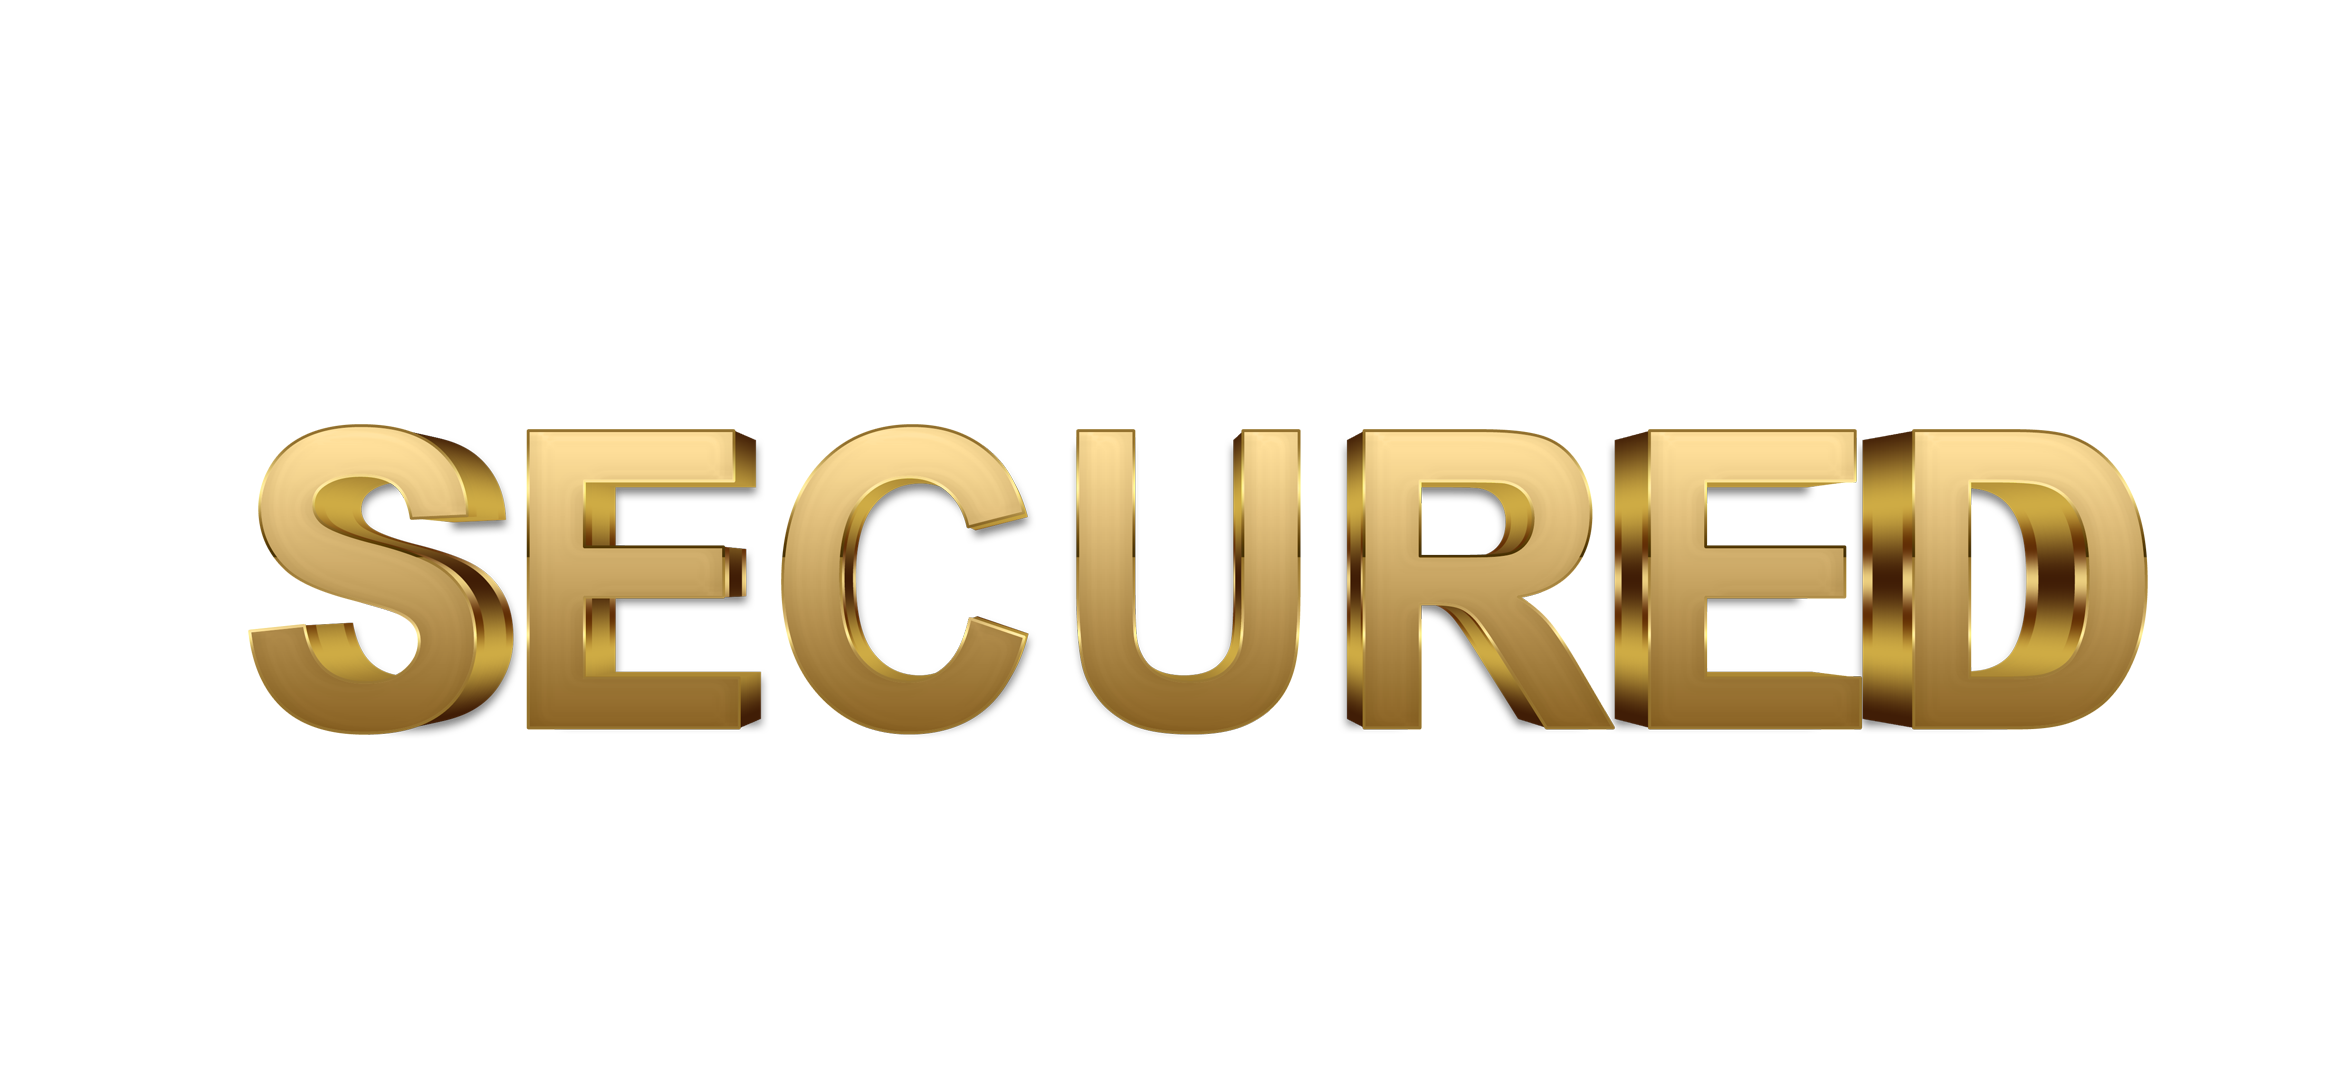 Secured word png, Secured png, word Secured gold text typography PNG images Secured png transparent background